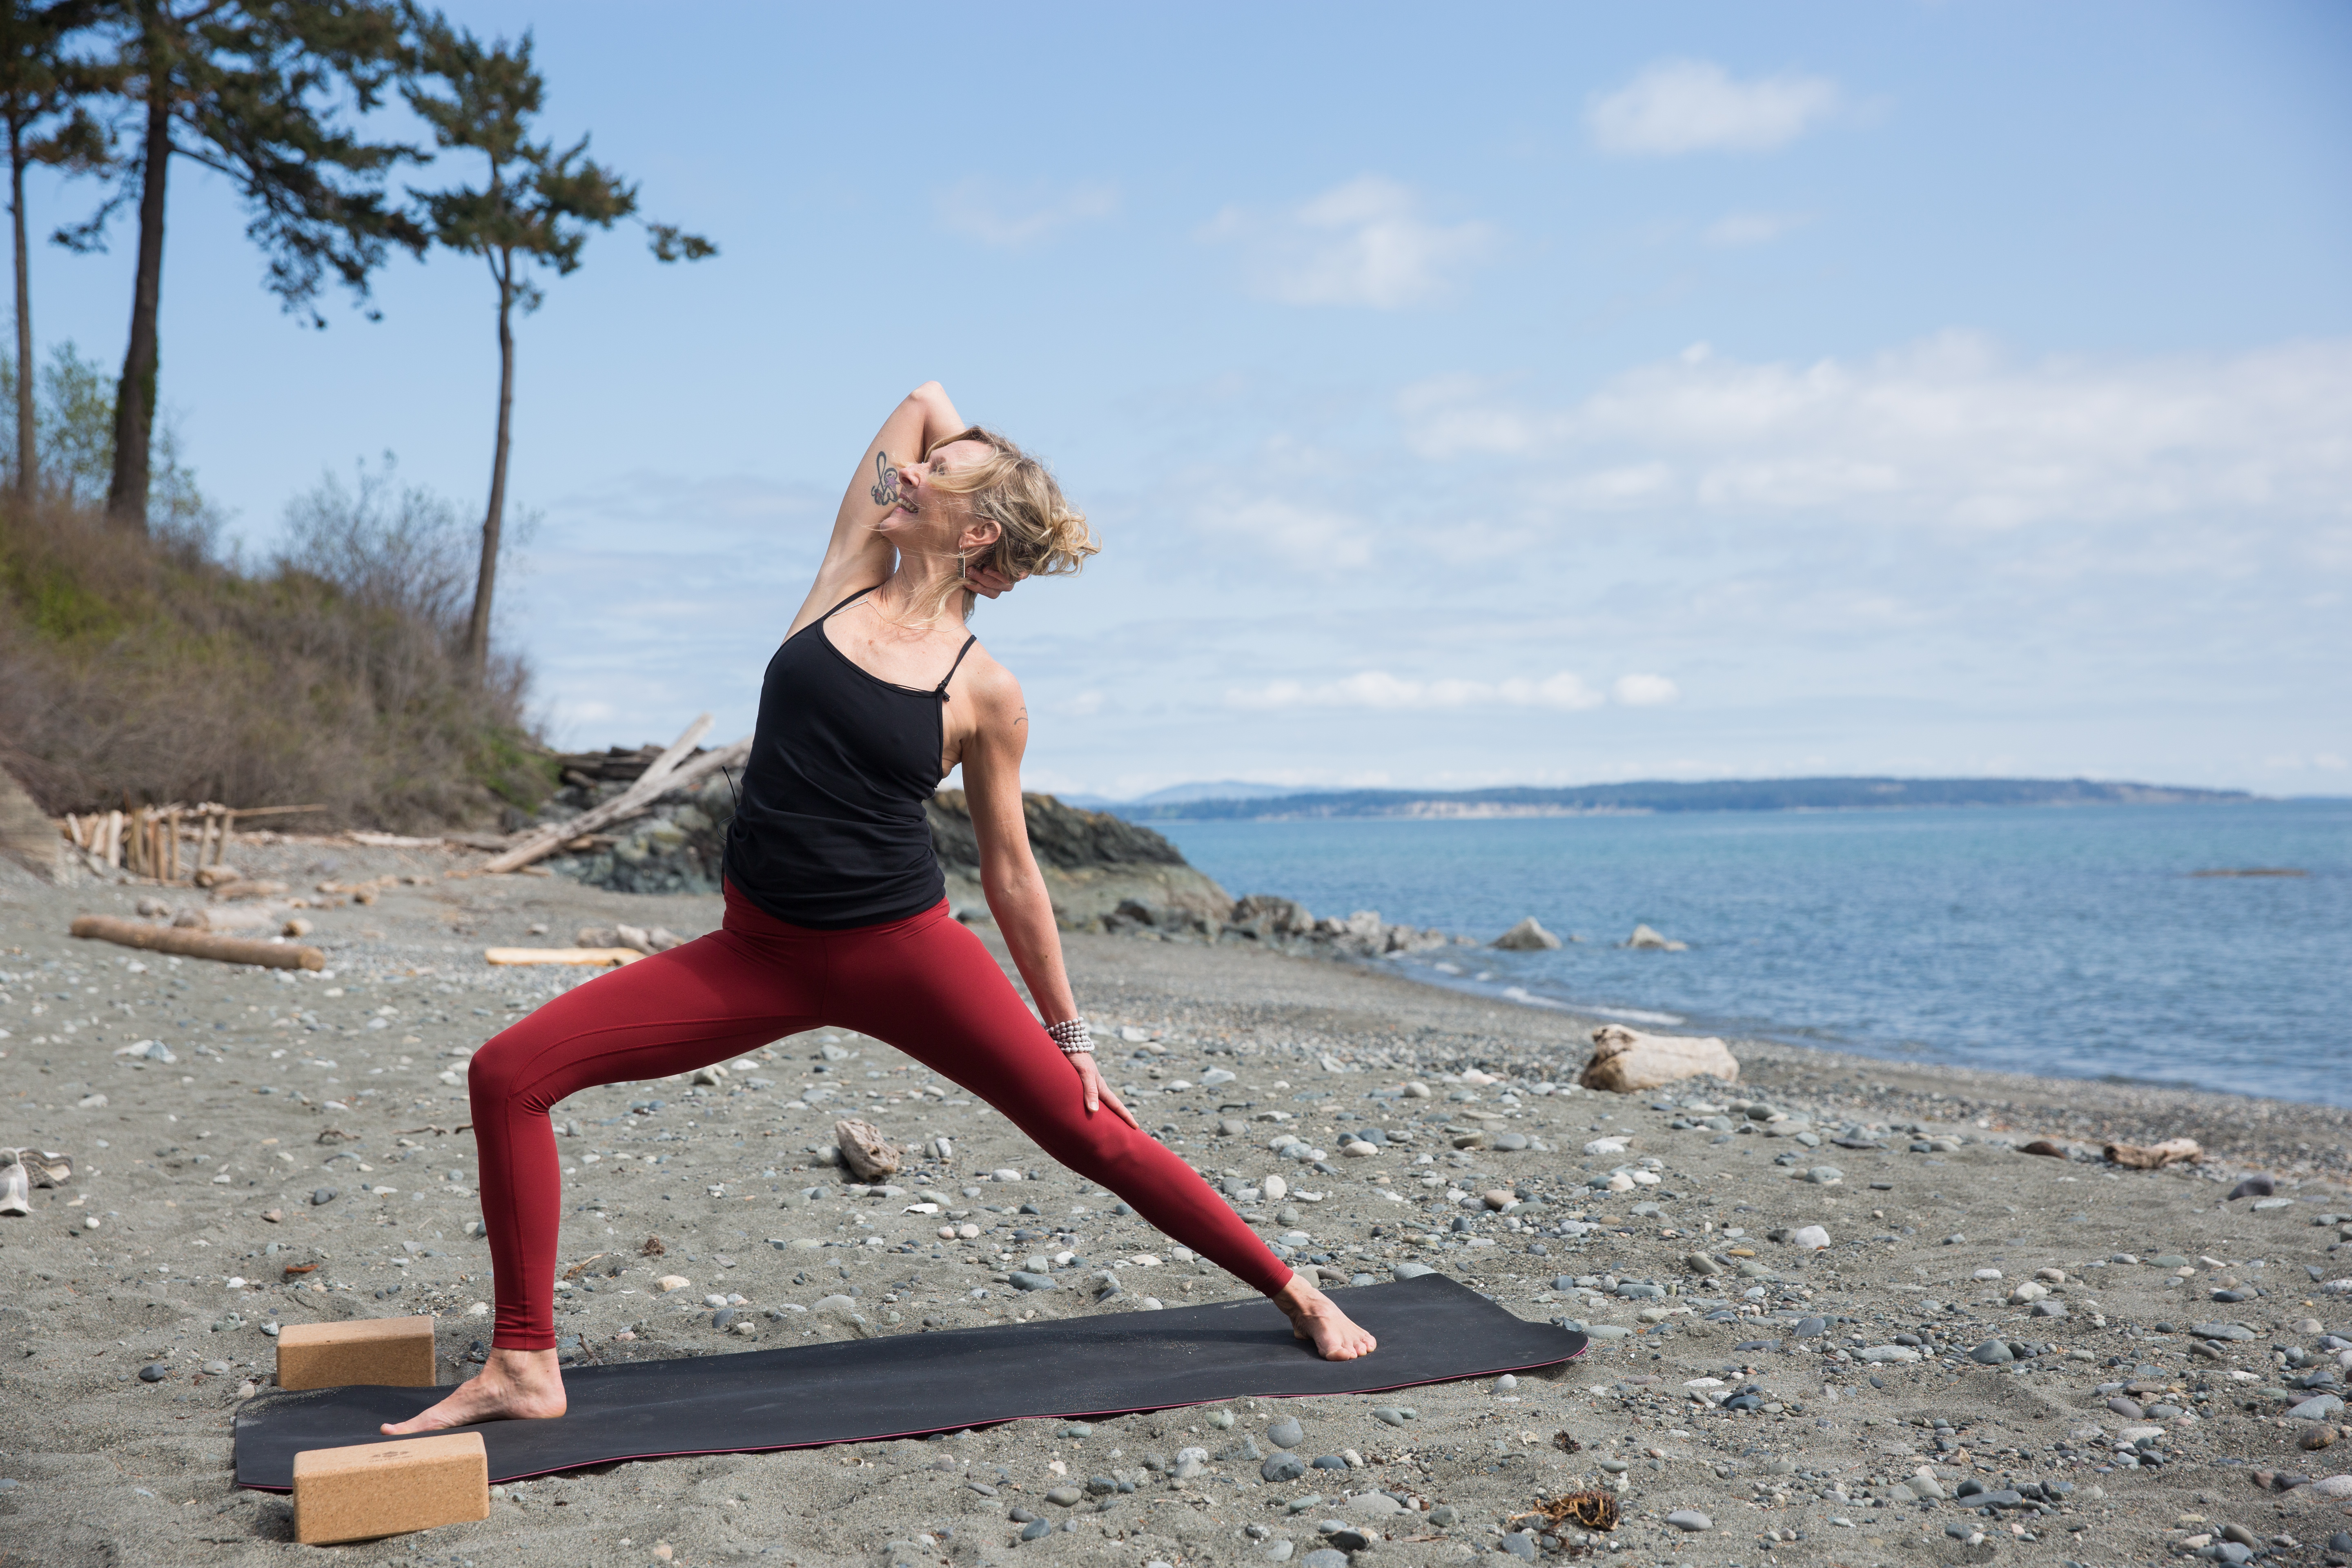 Explore the Many Different Types of Yoga